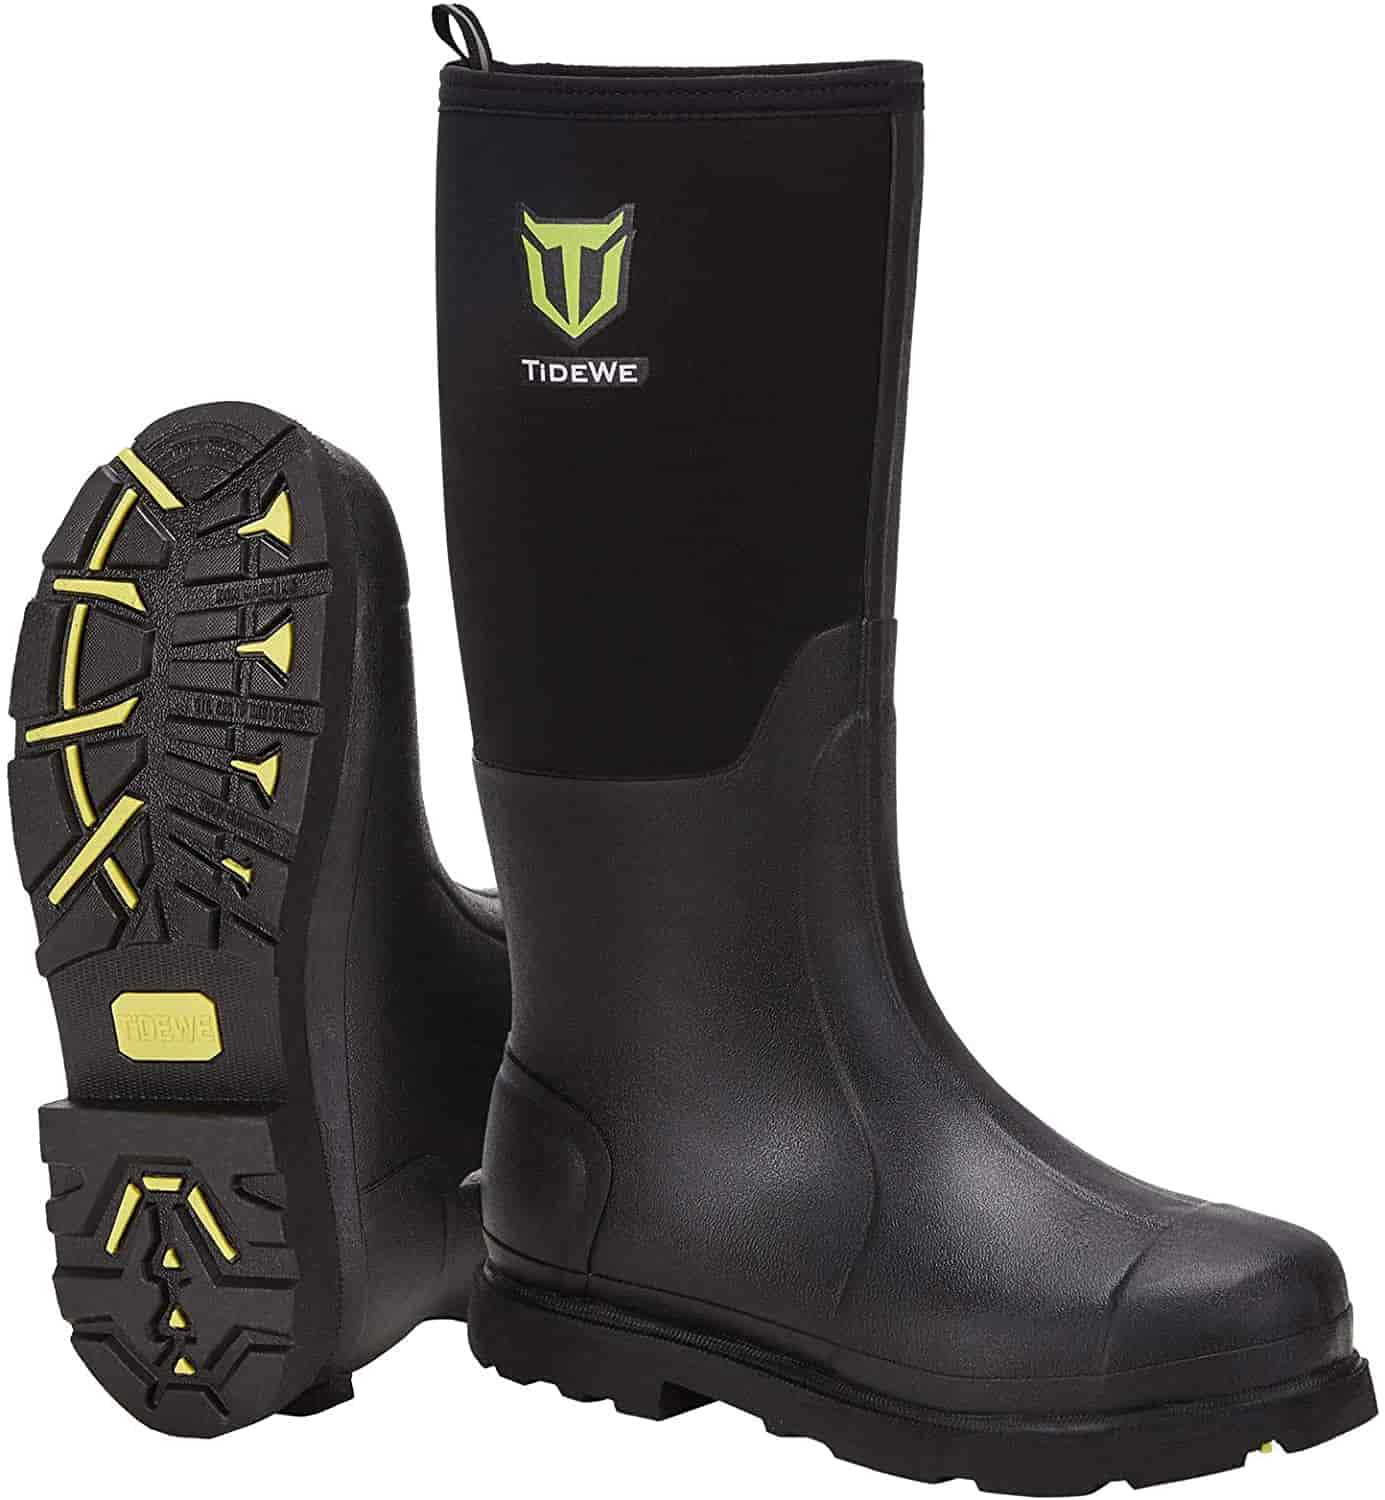 TIDEWE Rubber Work Boot for Men with Steel Shank